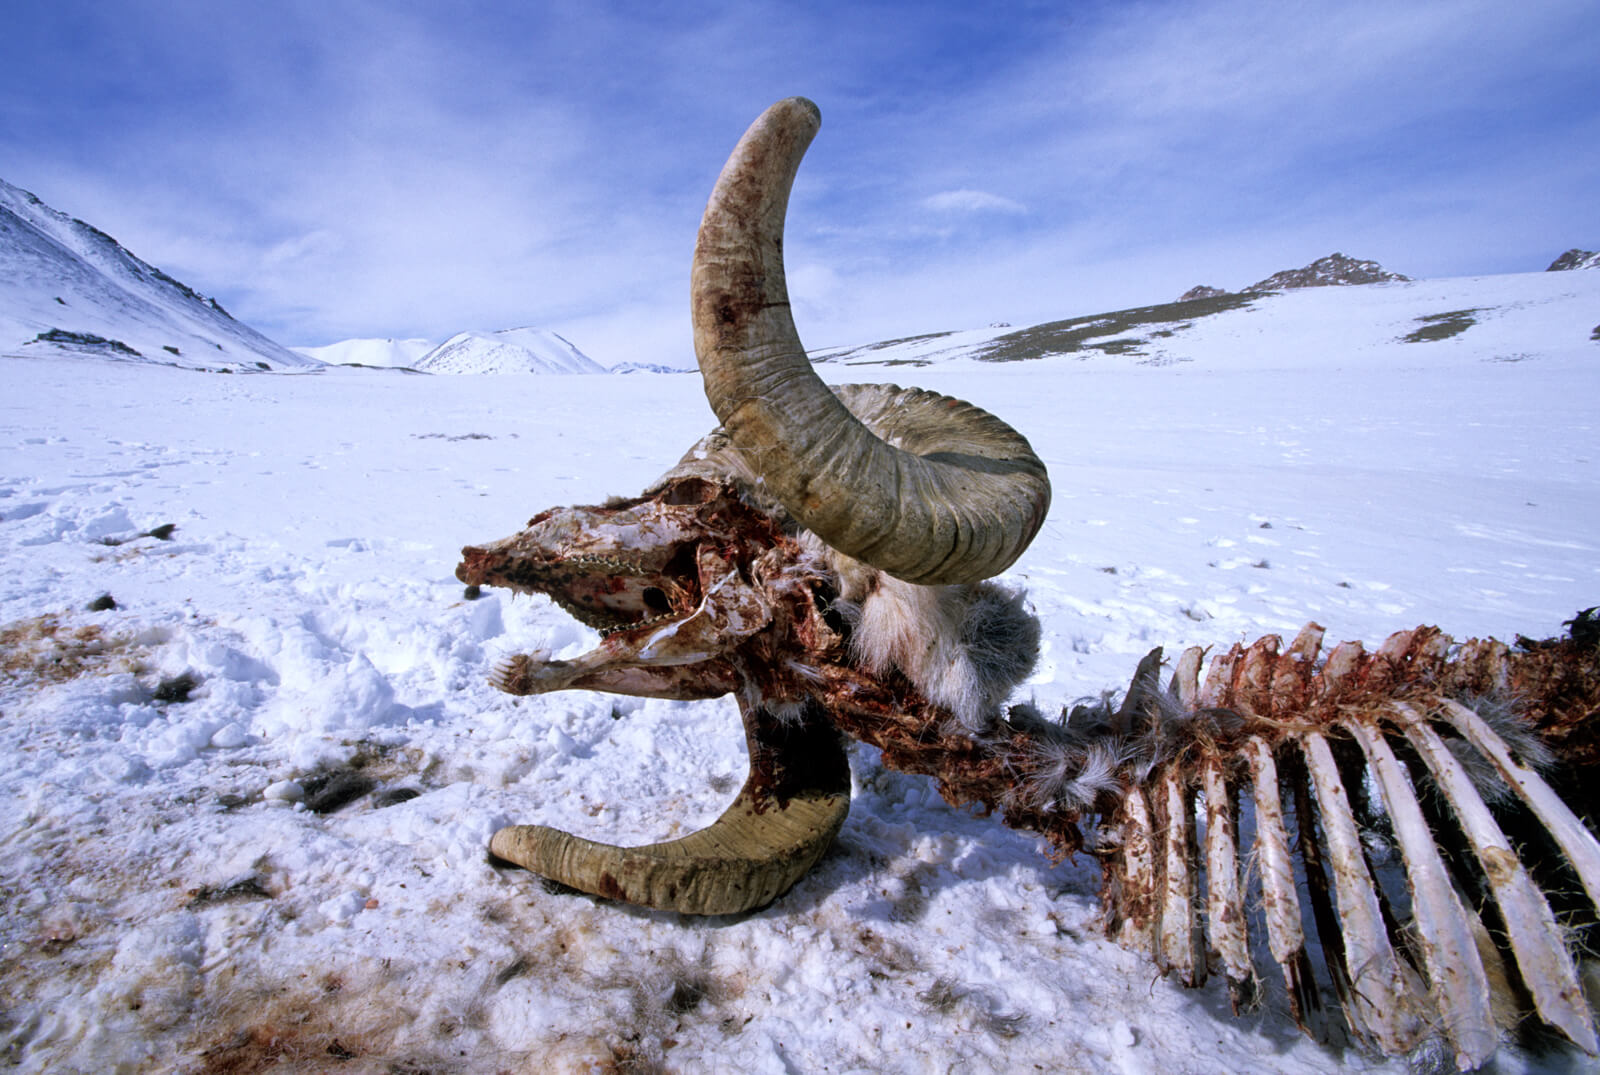 Remains of a Marco Polo sheep, a threatened subspecies of Argali; this individual was killed by wolves, but poaching by local hunters and military is a much greater threat. Photo © BethWald / WCS